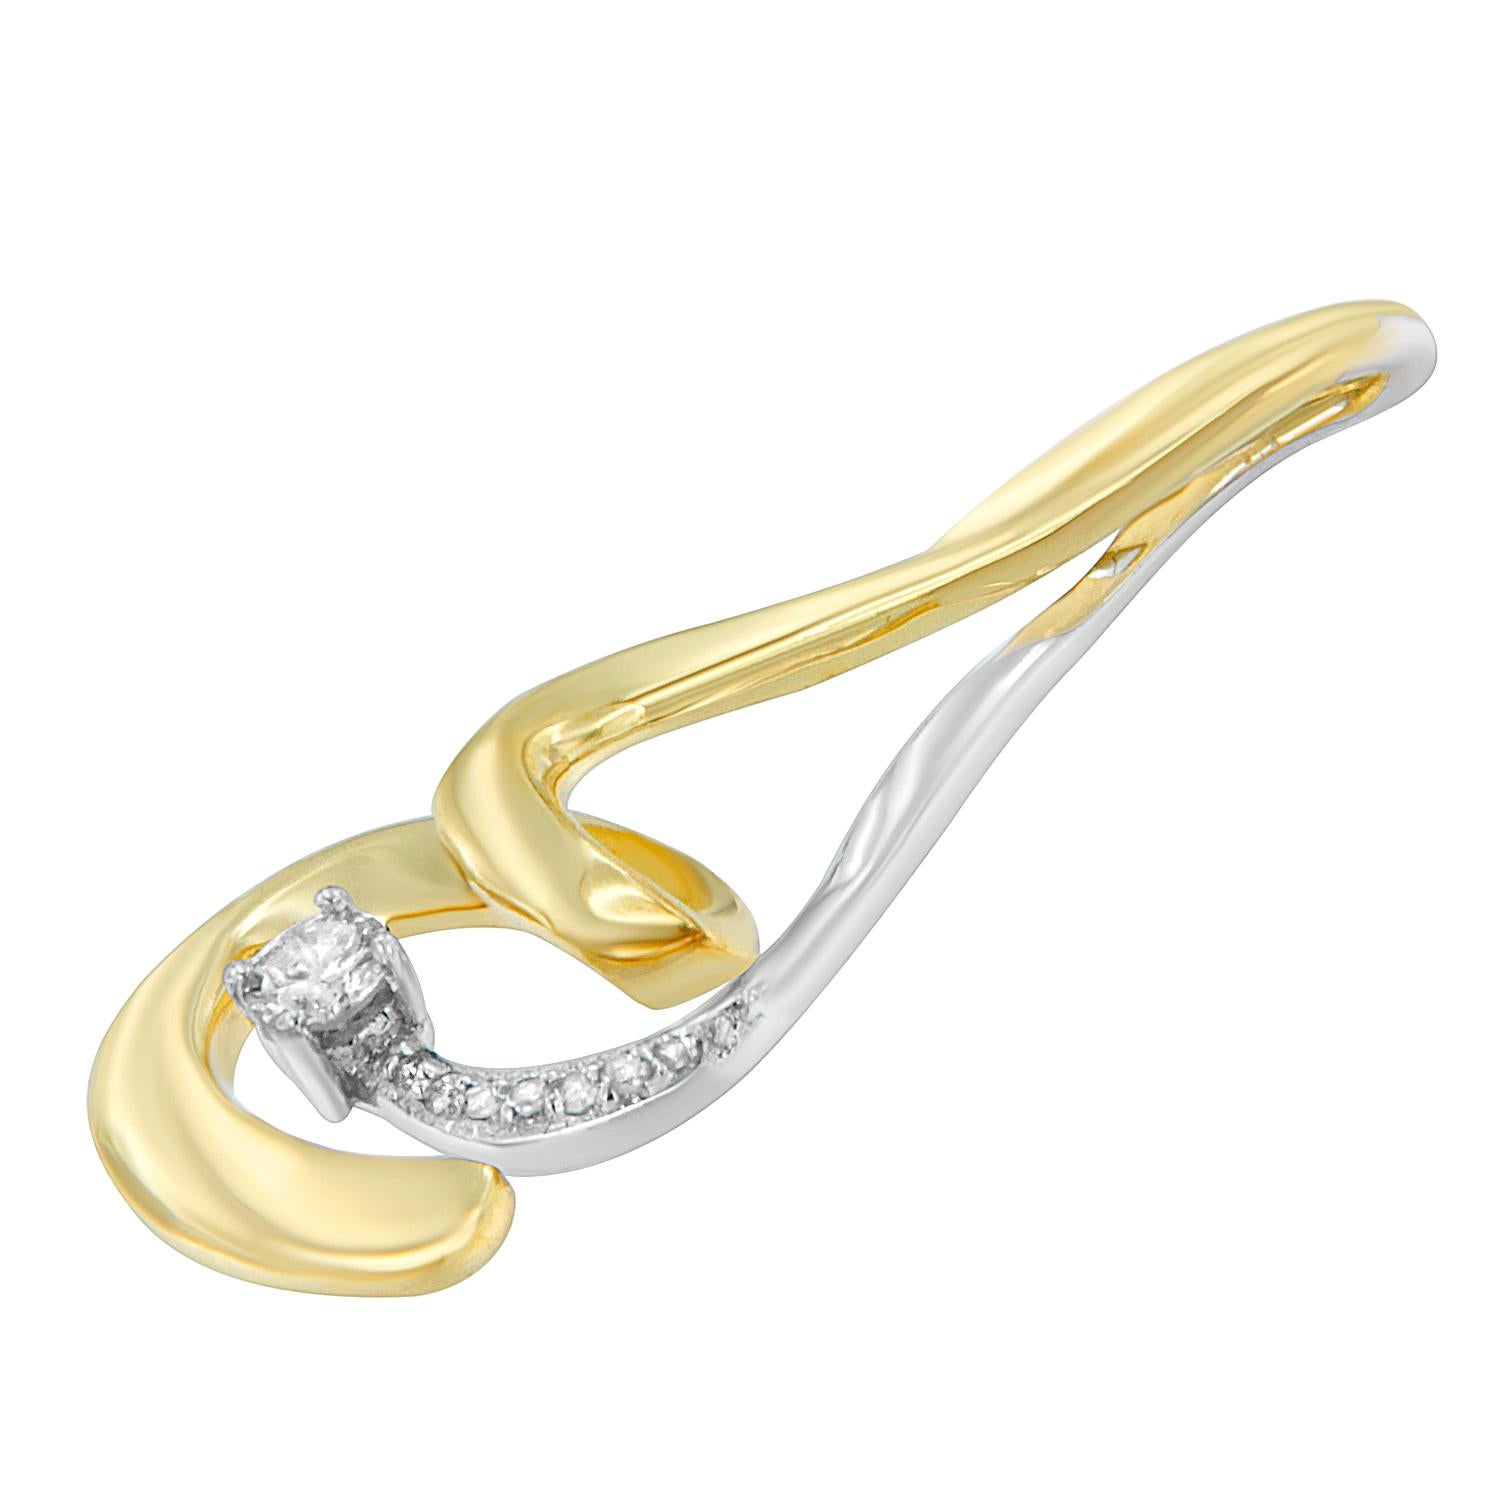 A swirl of white and yellow gold creates a stunning spiral effect, making this pendant a true standout. With a scattering of diamonds down one side, capped off by a larger stone at bottom, this is one style she needs to have in her jewelry